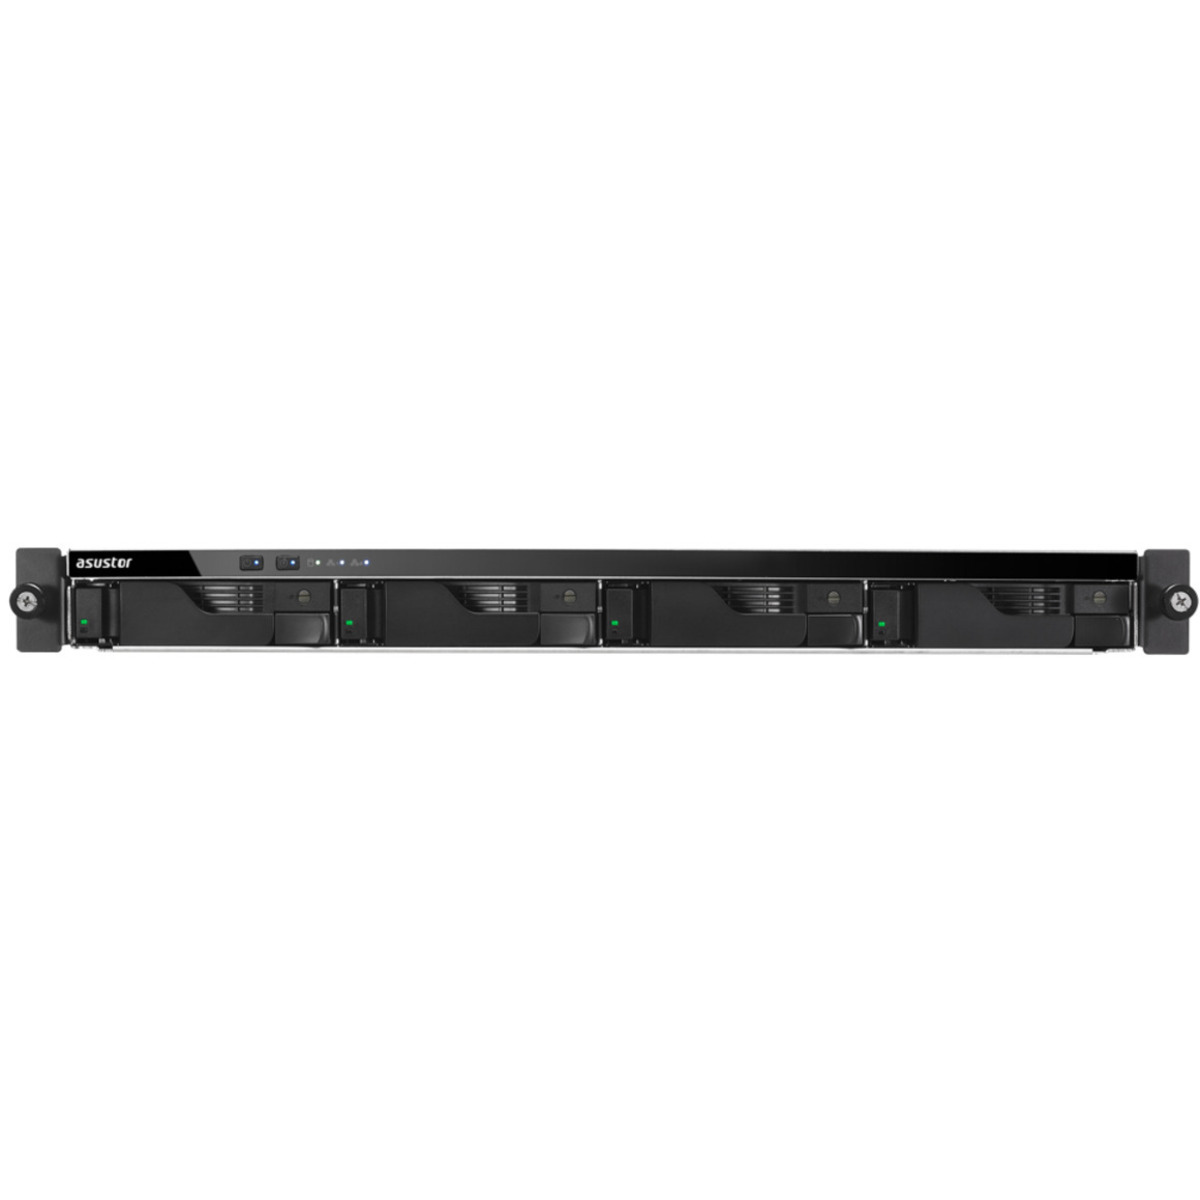 buy ASUSTOR LOCKERSTOR 4RS AS6504RS 8tb RackMount NAS - Network Attached Storage Device 4x2000gb Seagate IronWolf Pro ST2000NT001 3.5 7200rpm SATA 6Gb/s HDD NAS Class Drives Installed - Burn-In Tested - FREE RAM UPGRADE - nas headquarters buy network attached storage server device das new raid-5 free shipping simply usa LOCKERSTOR 4RS AS6504RS